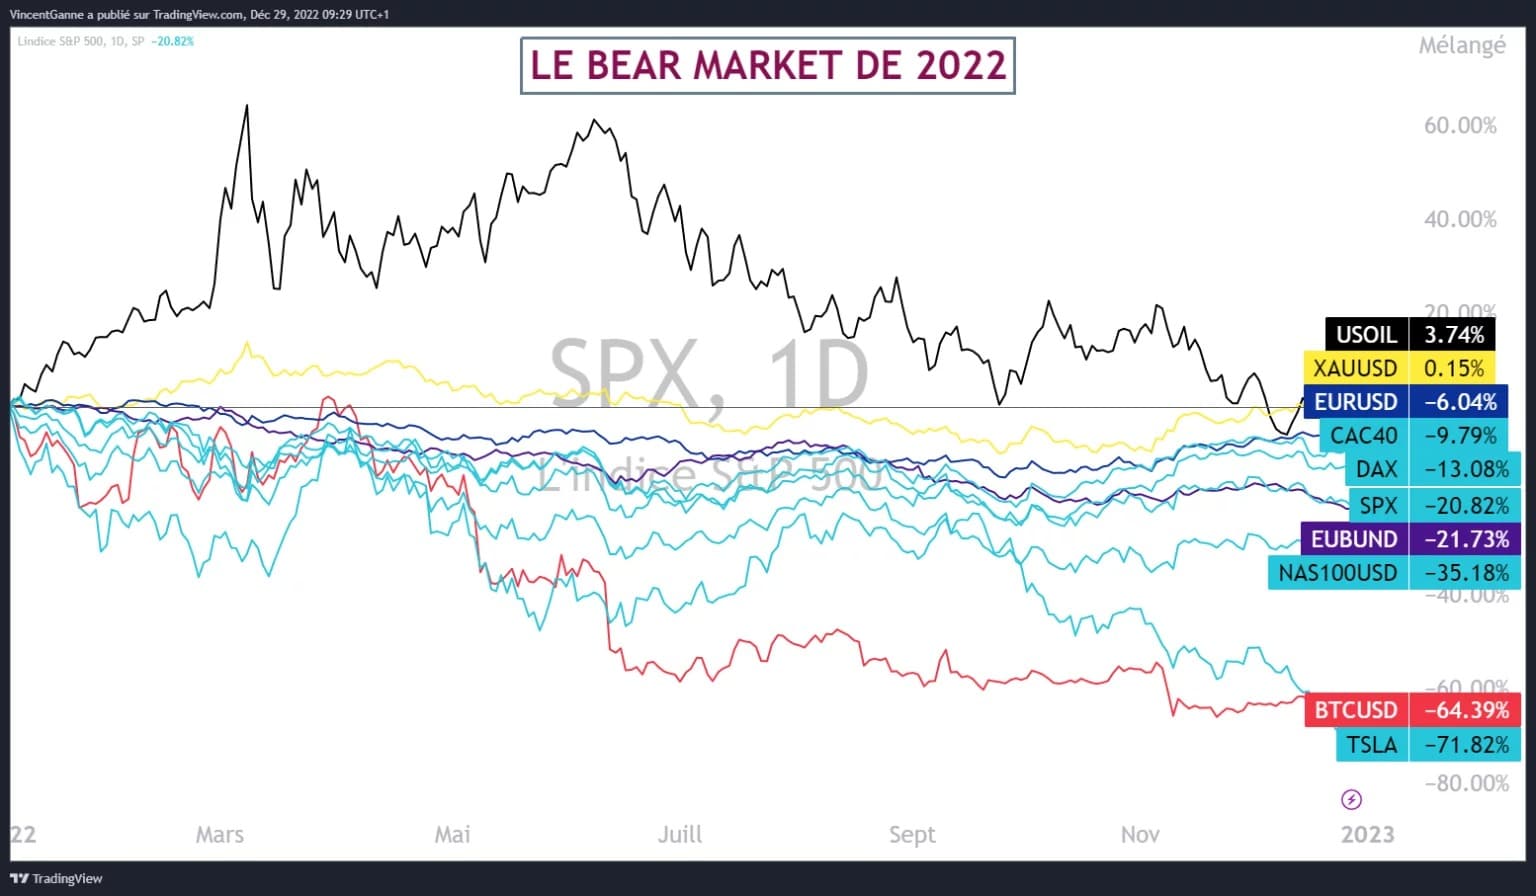 Chart showing the relative performance throughout 2022 of selected components of all major asset classes